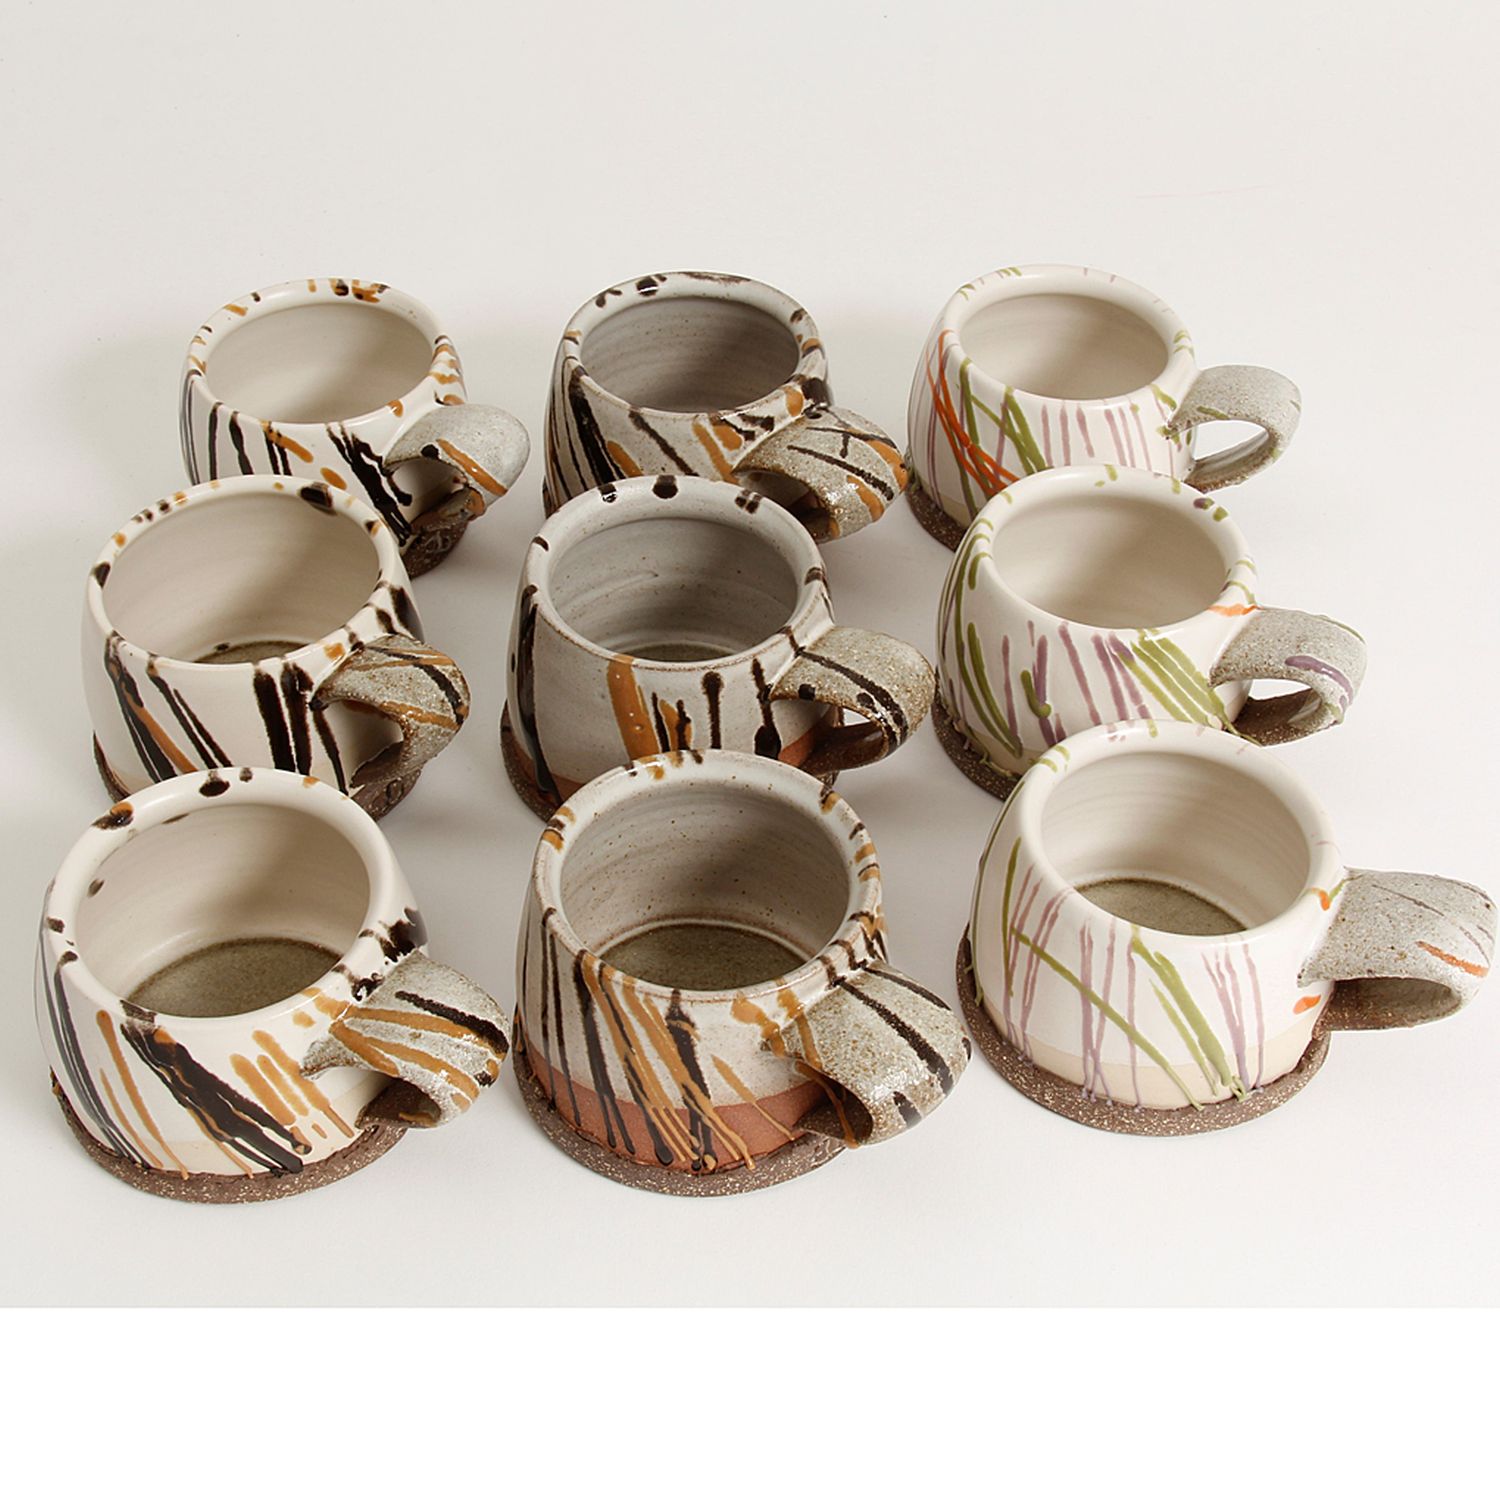 Gracia Isabel Gomez: Espresso mug in Brown Chocolate Product Image 3 of 6